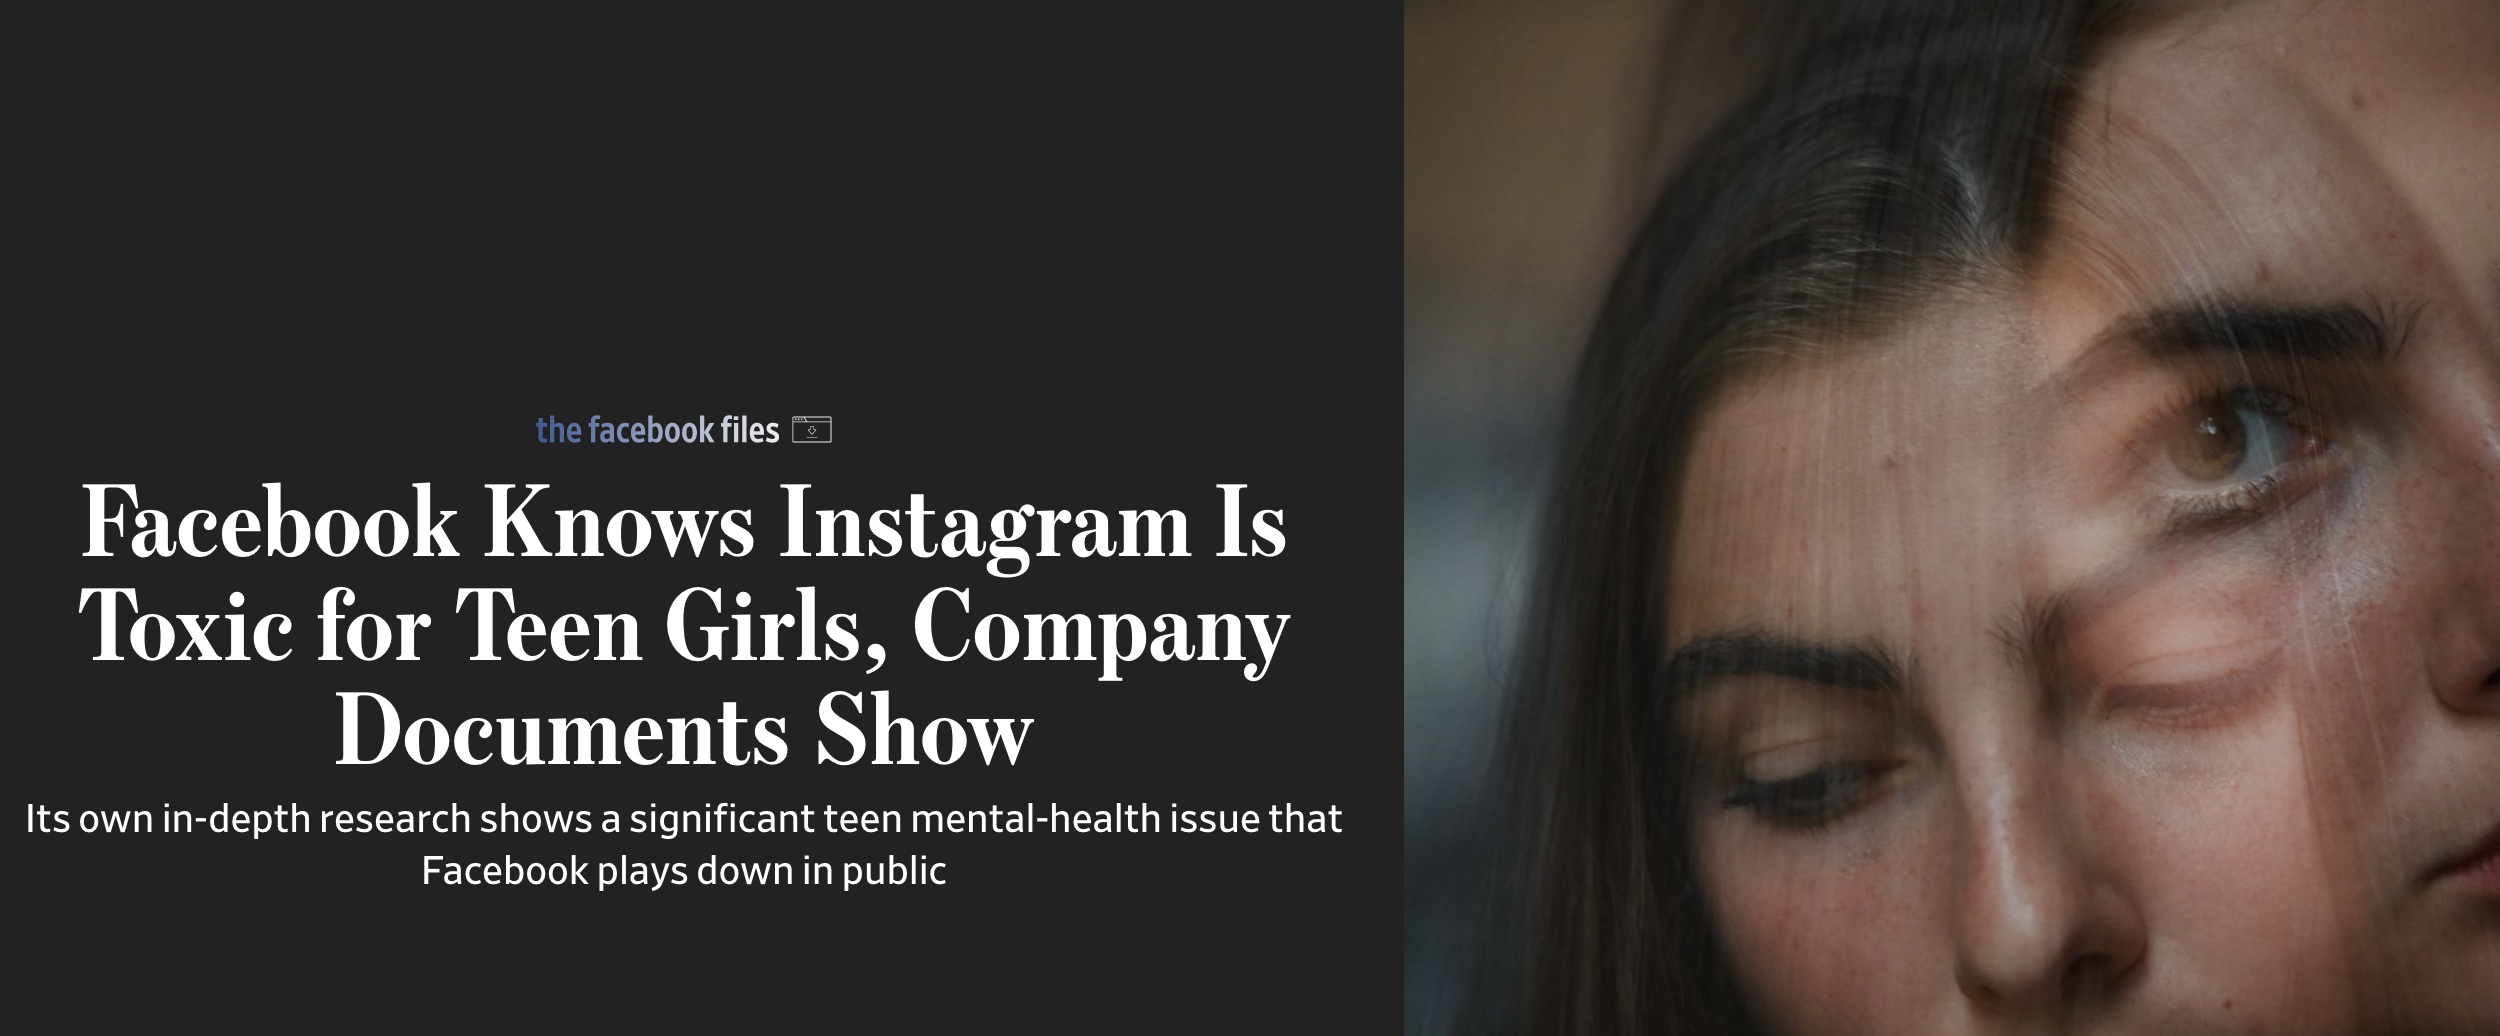 Facebook Knows Instagram Is Toxic for Teen Girls, Company